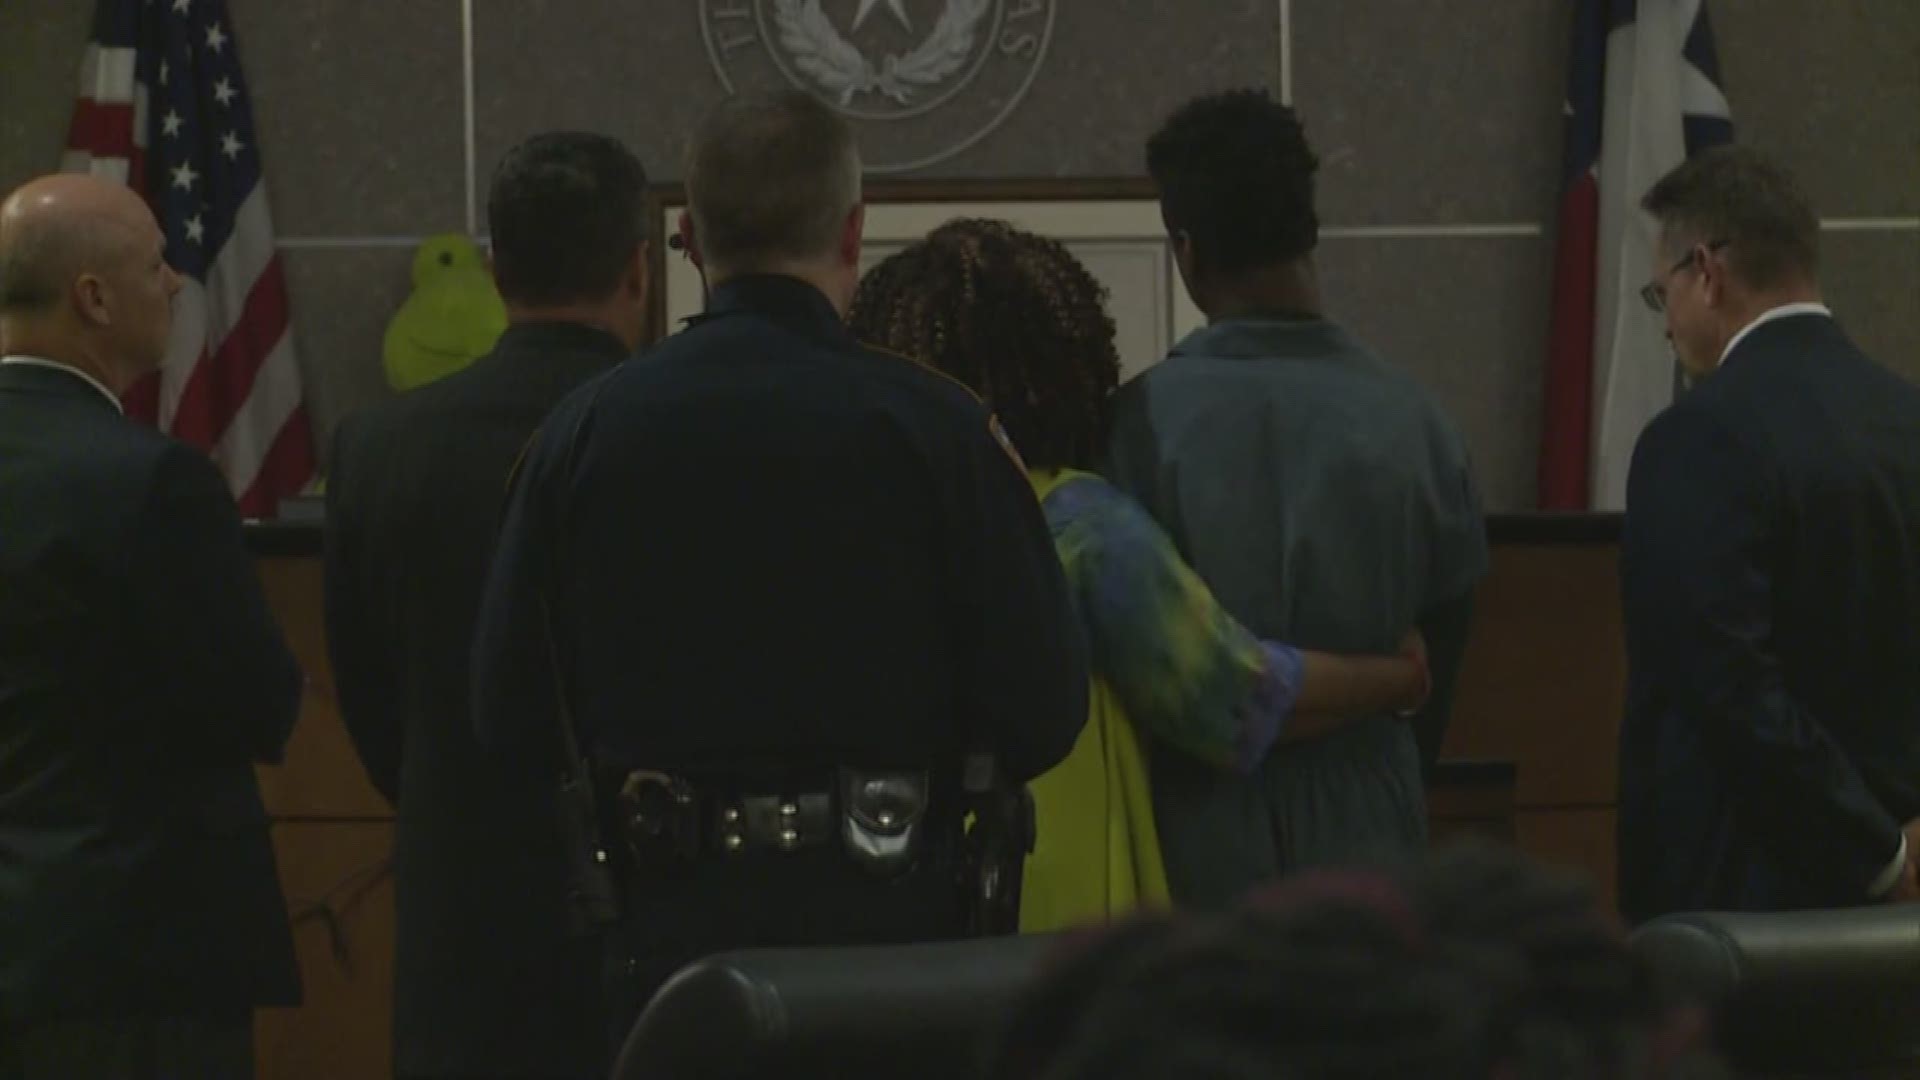 The teenager accused of shooting and killing his parents in July of 2016 will stand trial as an adult, according to the Harris County District Attorney's Office.